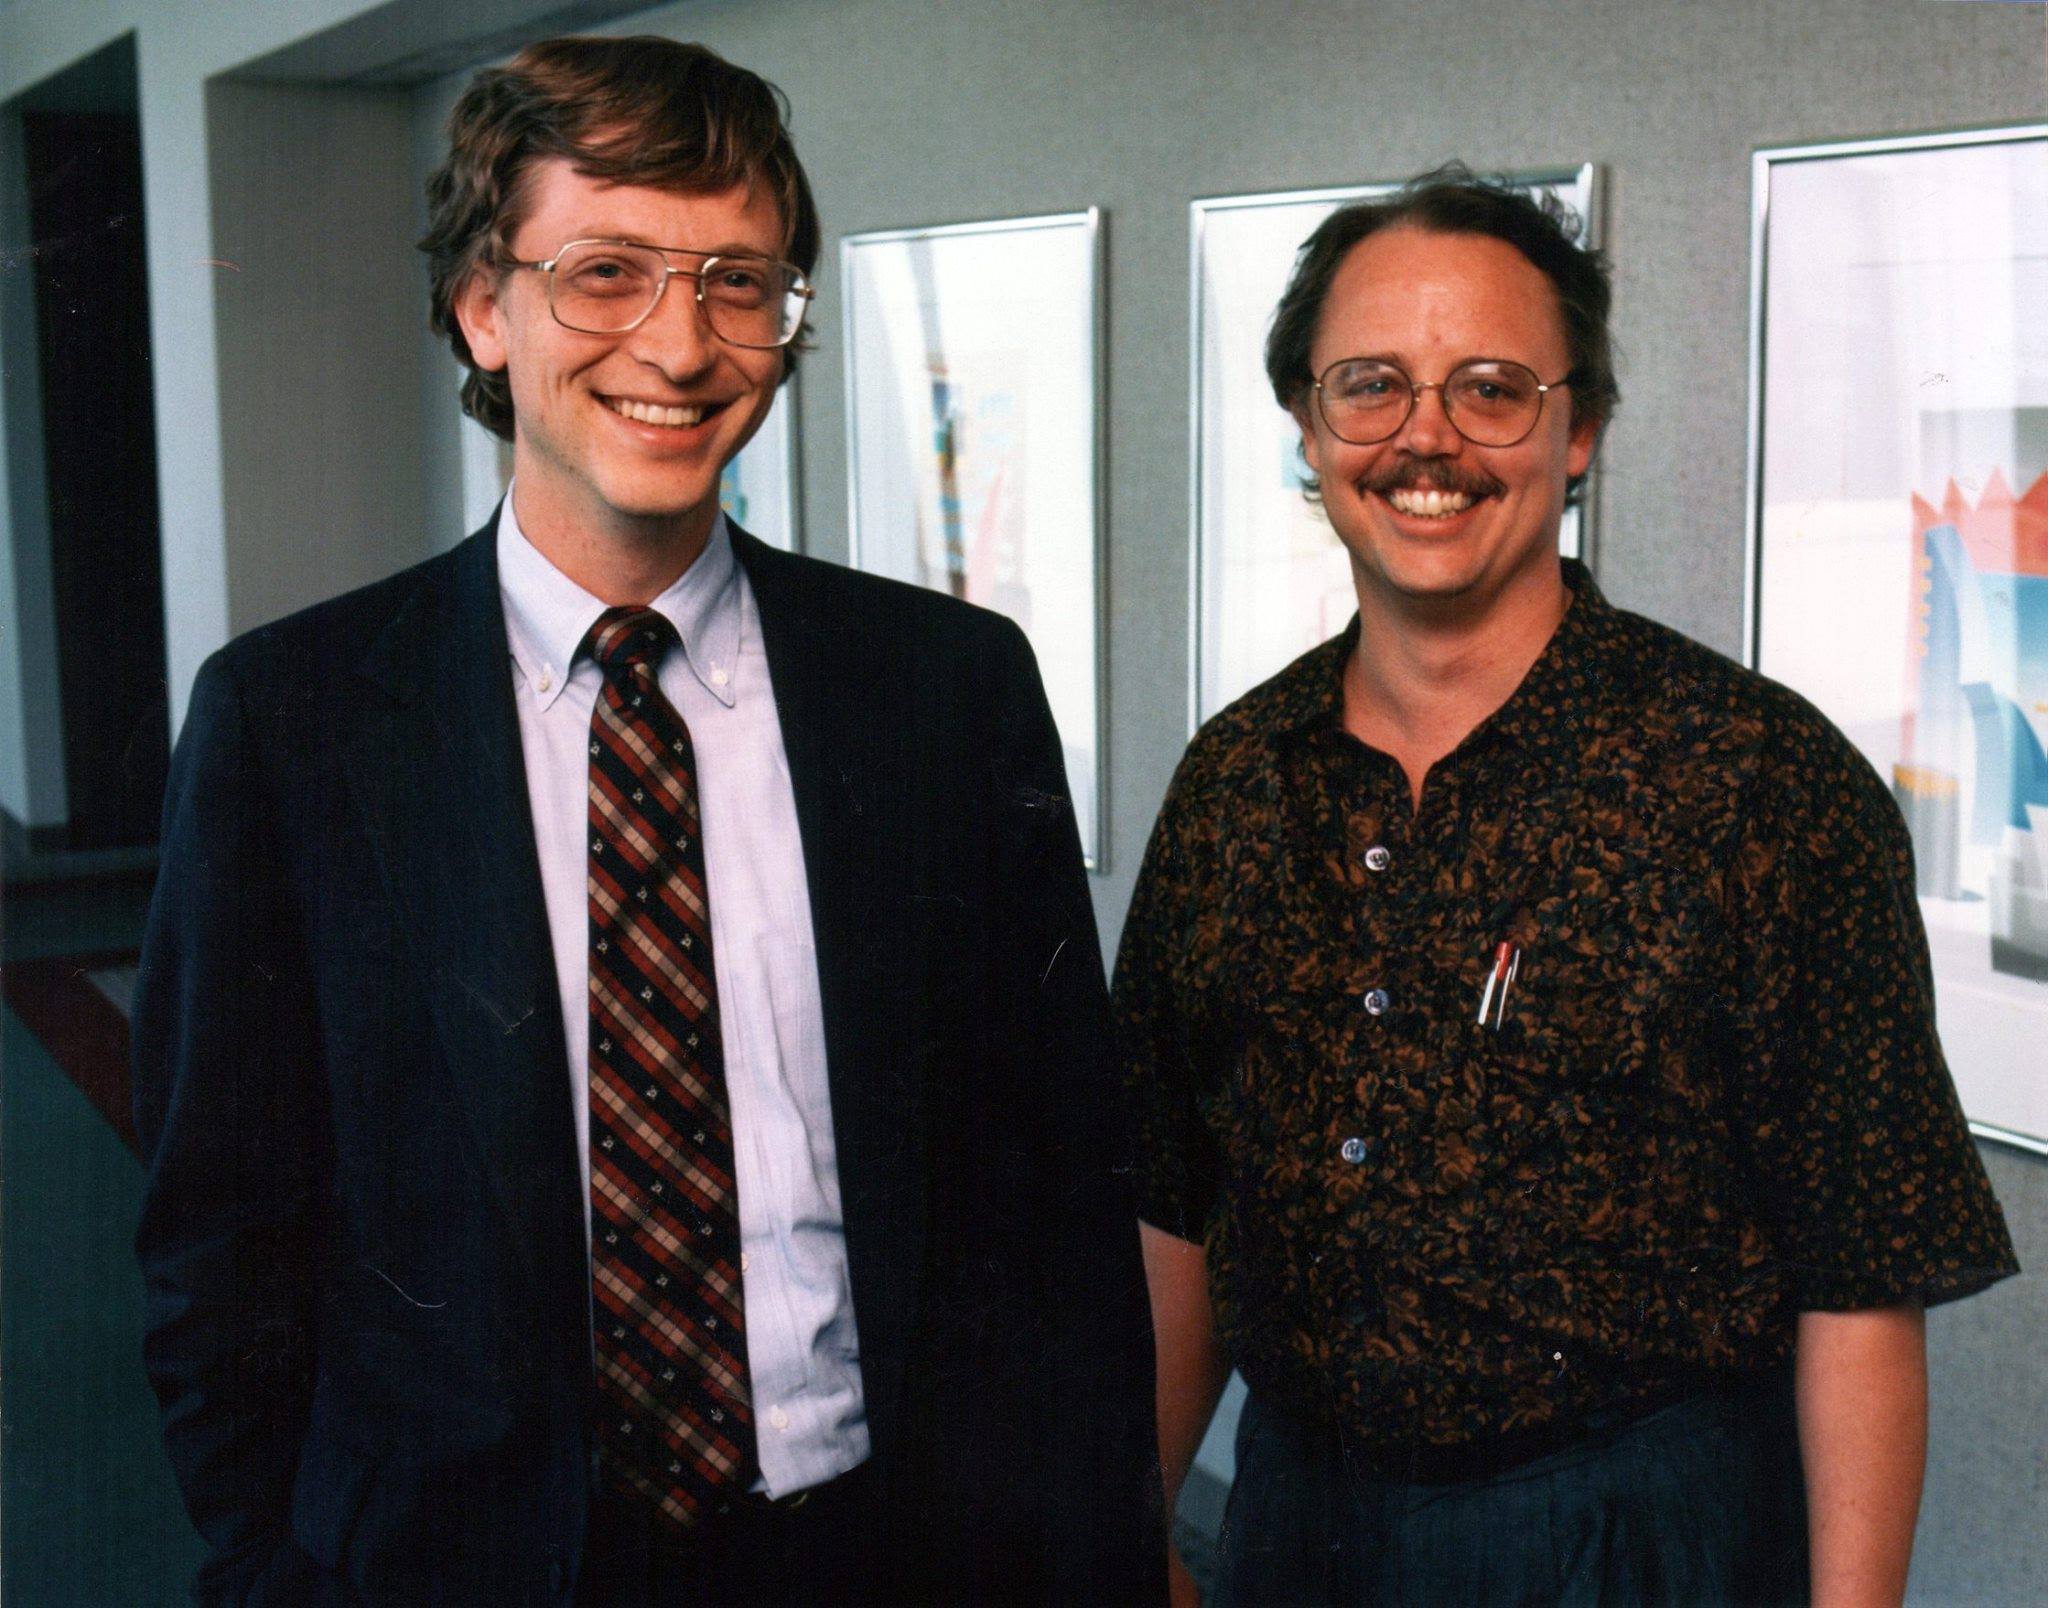 Bill Gates and David Bunnell at PC World's office in the 1980s